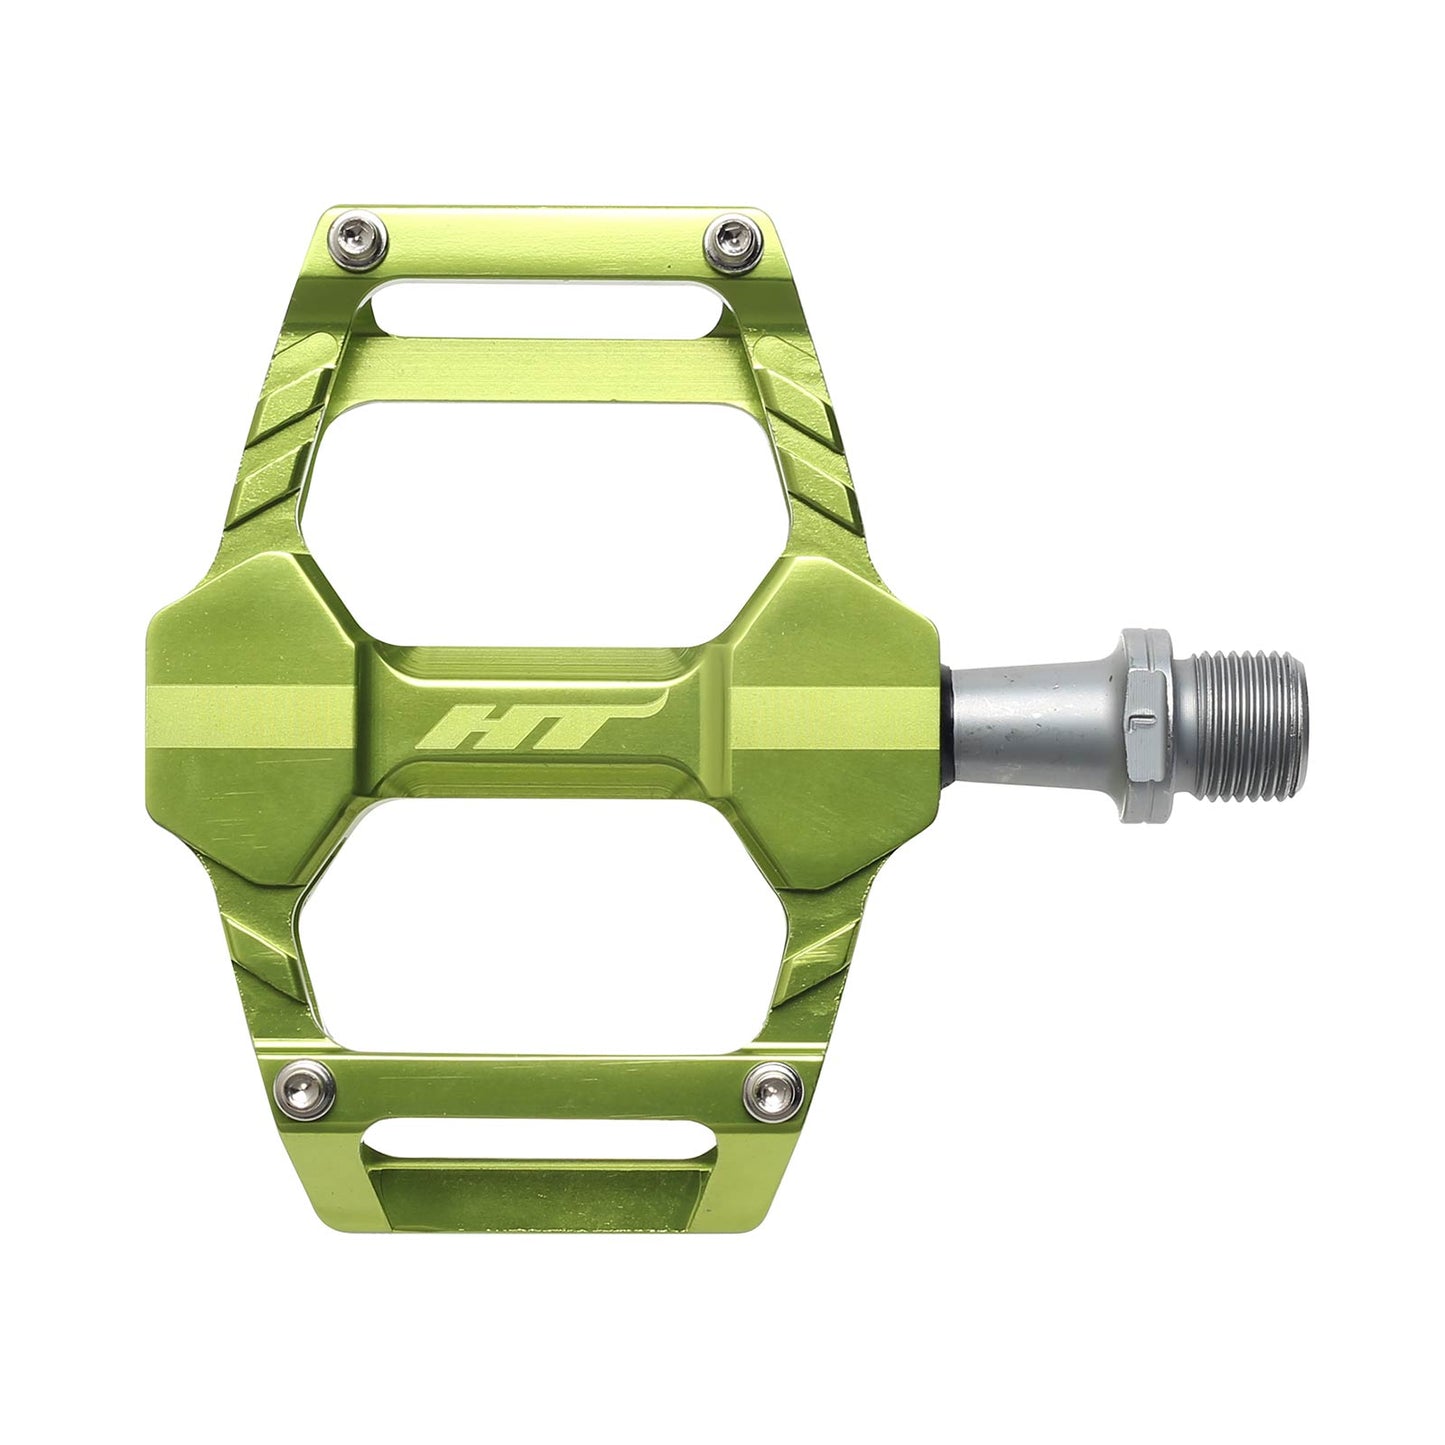 Ht AR06 Pedals Alloy / CNC CRMO - Apple Green